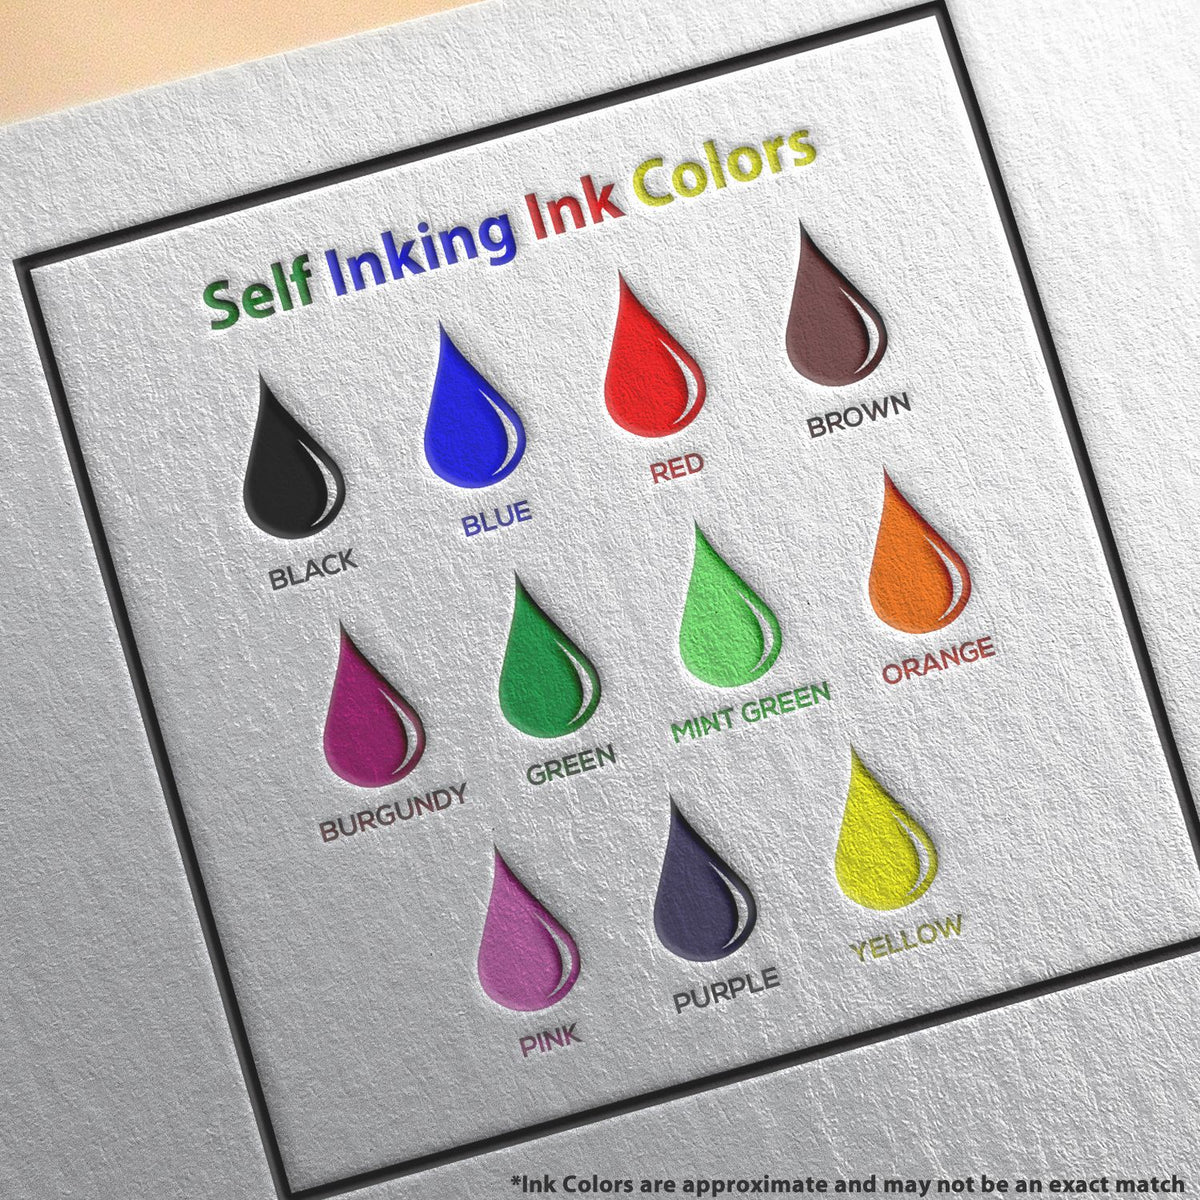 A picture showing the different ink colors or hues available for the Heavy-Duty Colorado Rectangular Notary Stamp product.